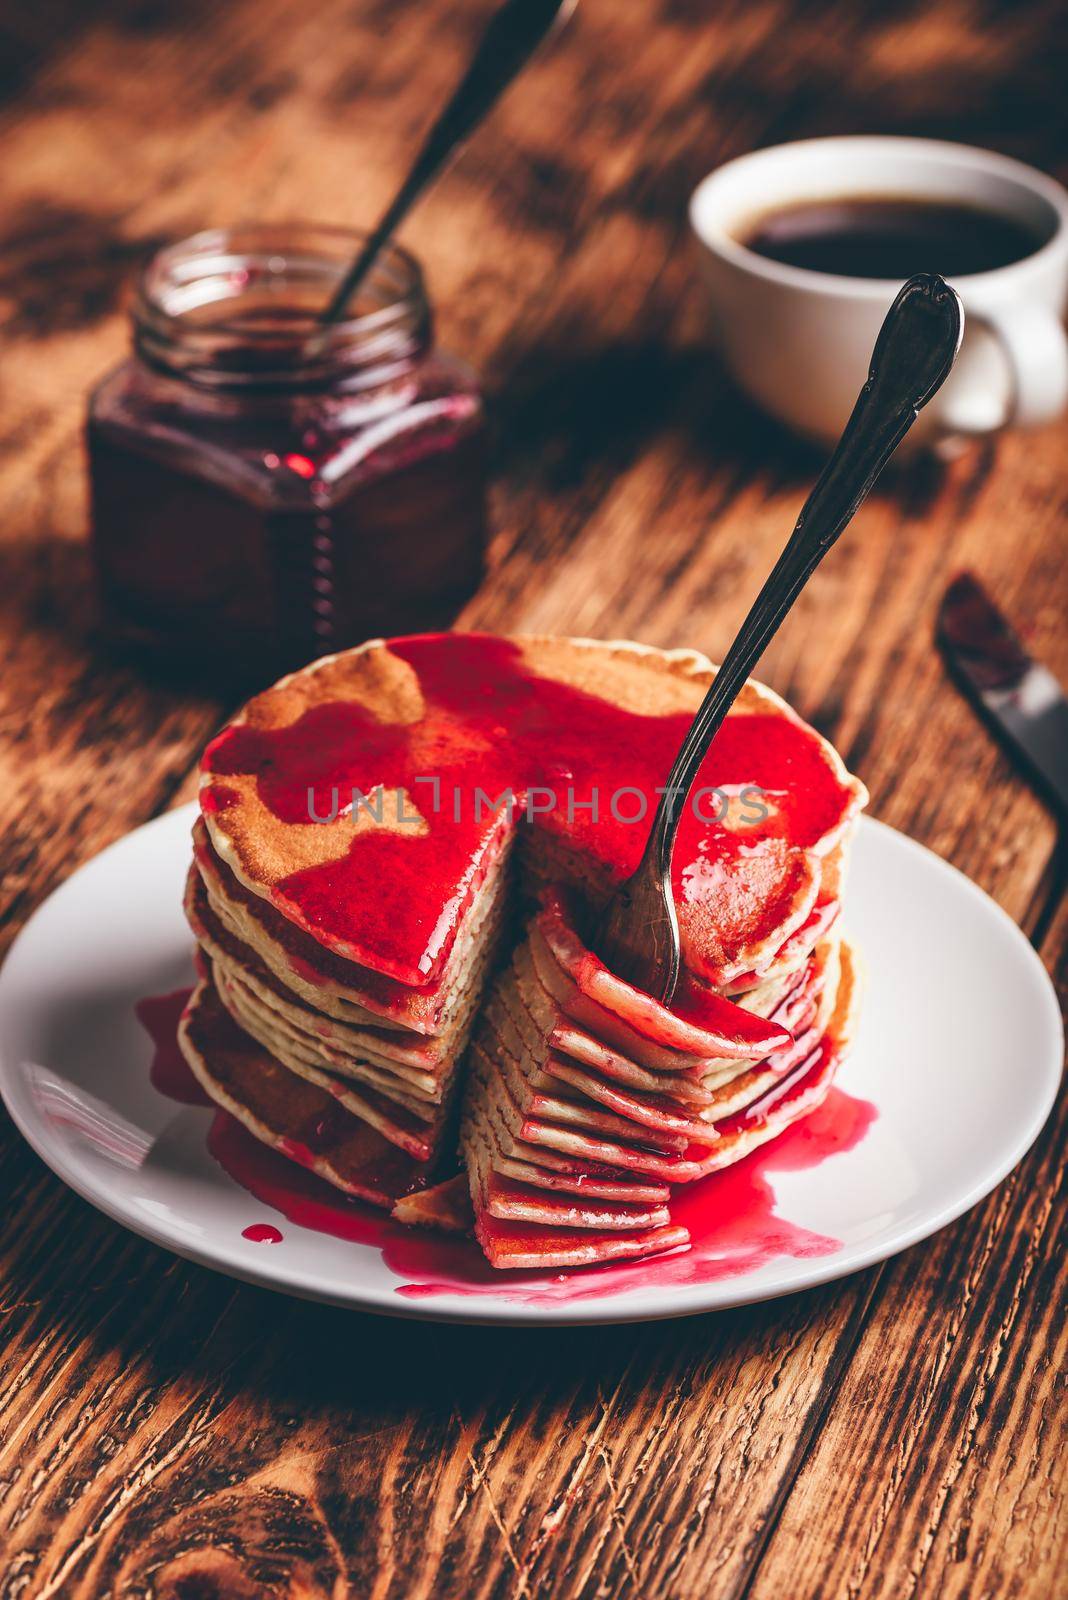 Stack of pancakes with berry fruit marmalade by Seva_blsv